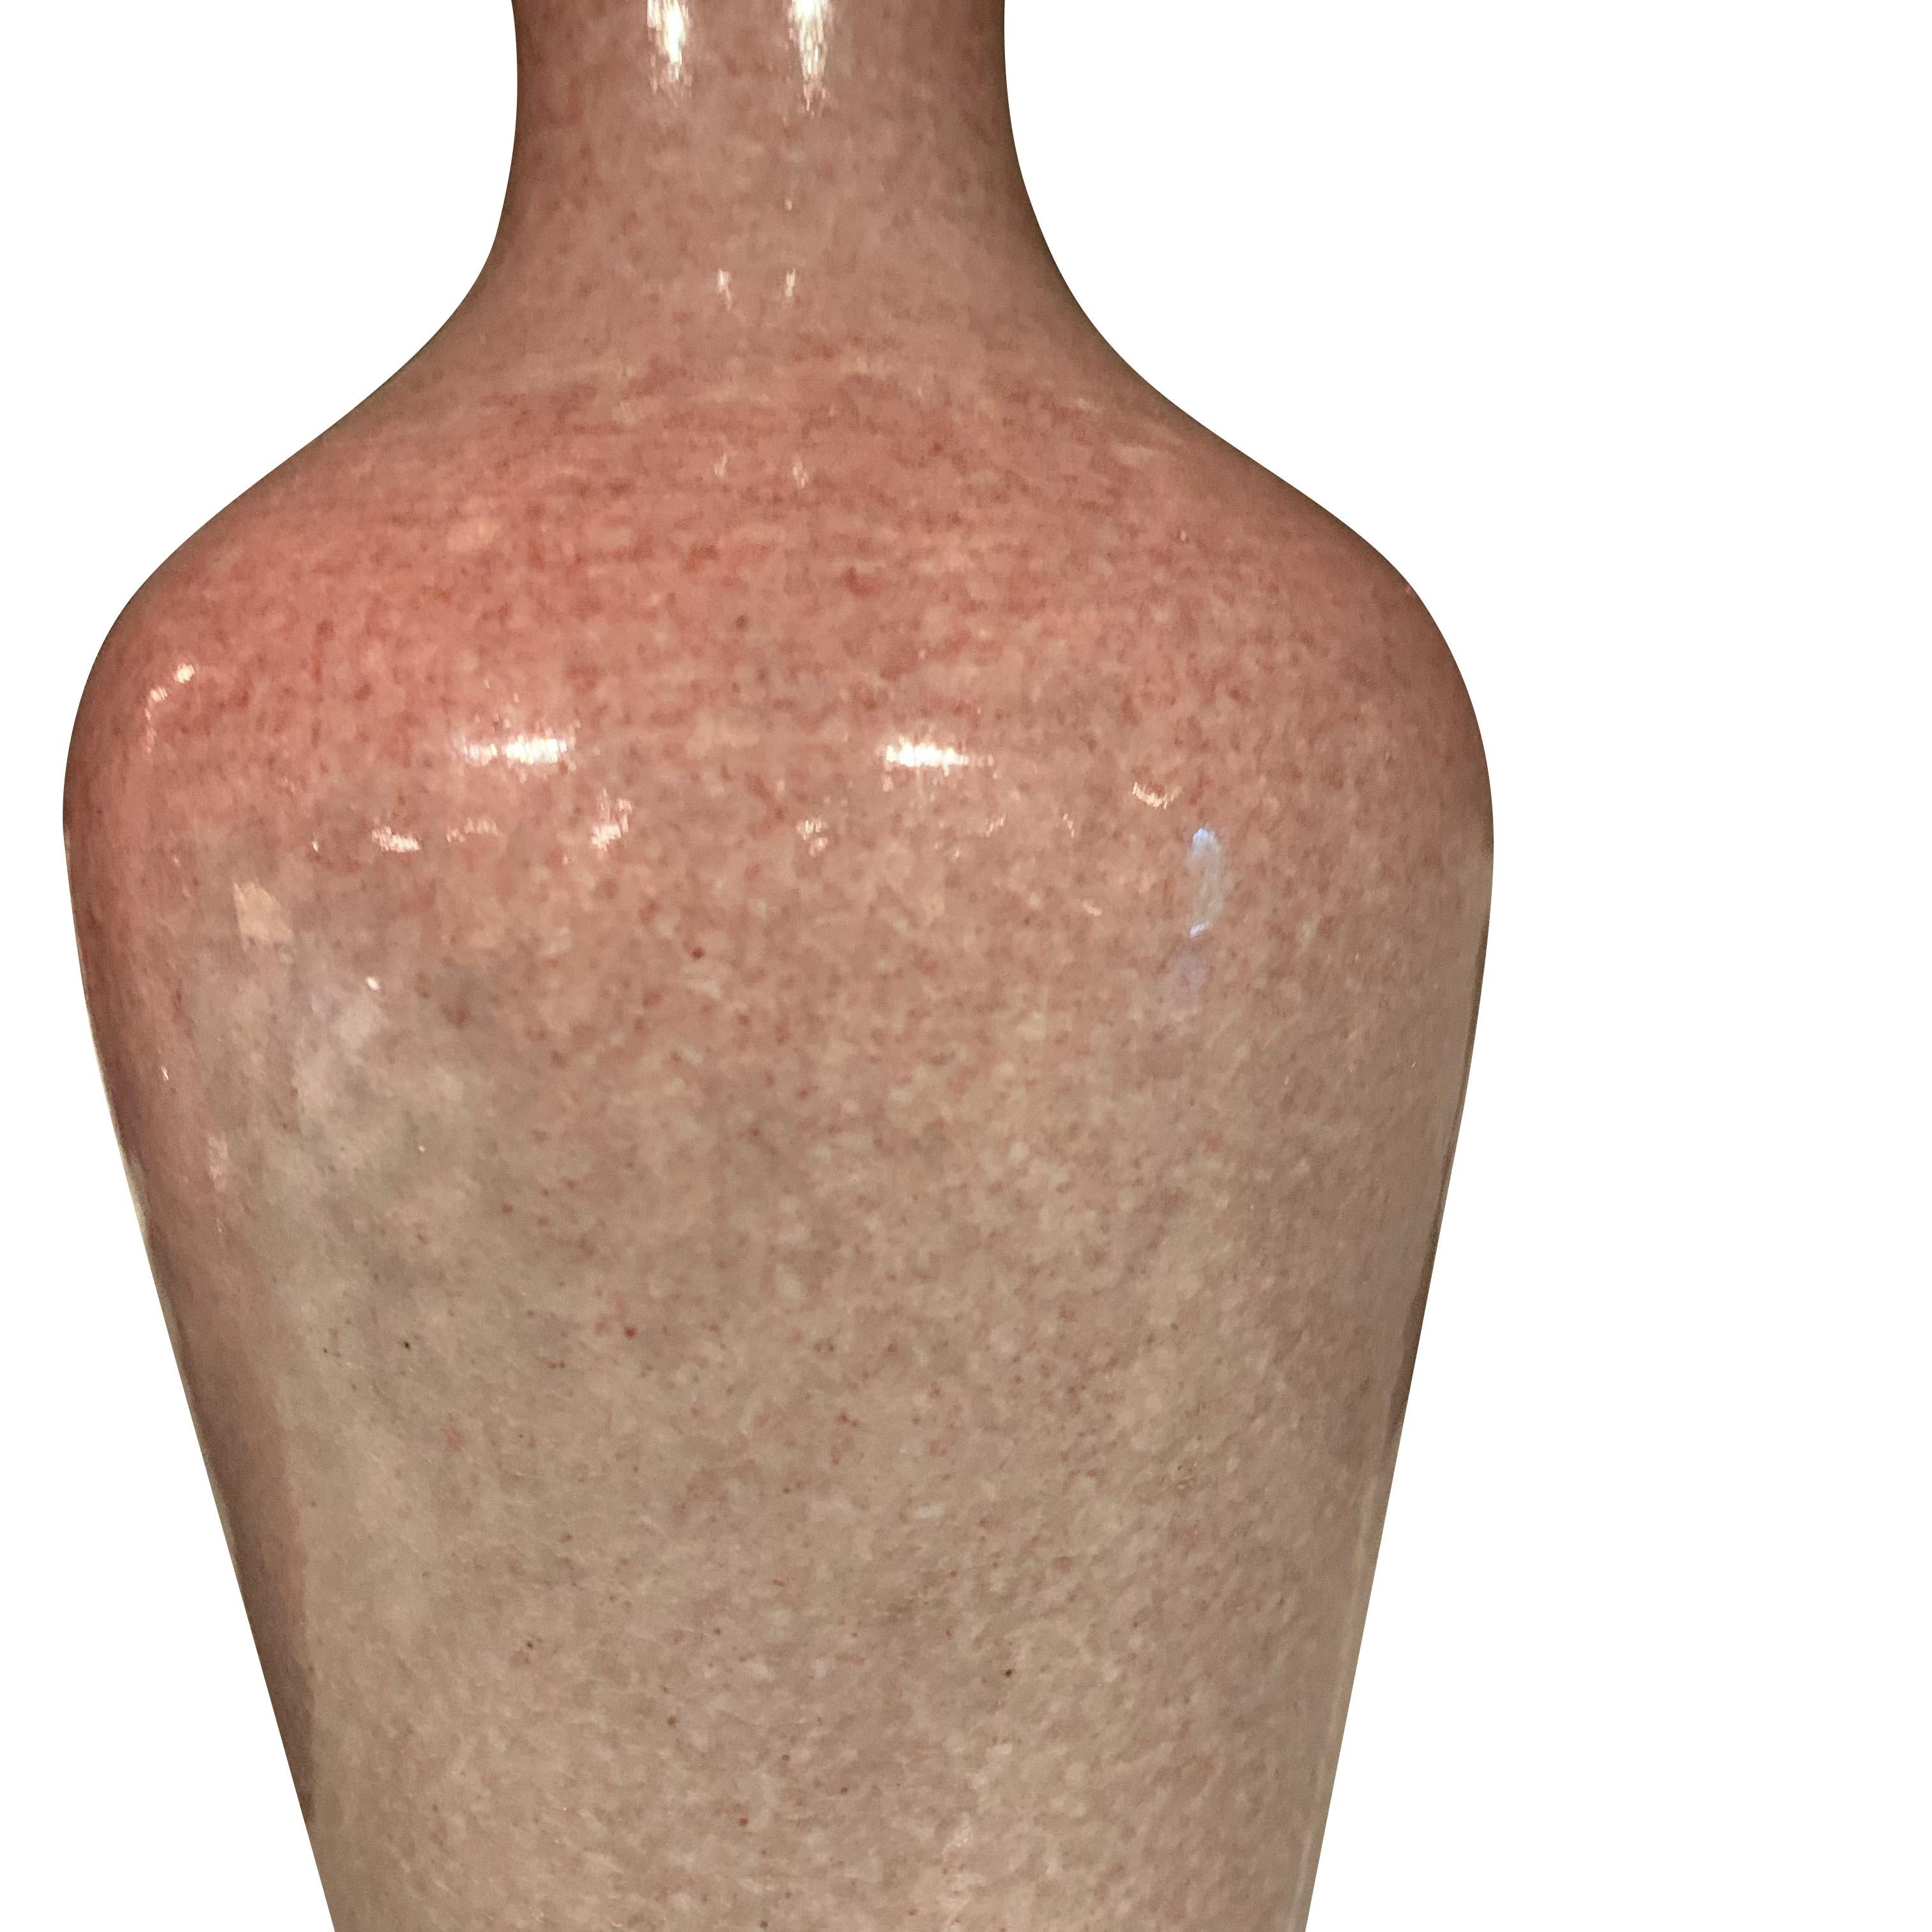 Contemporary vase with traditional tulip shape
Mauve color glaze
Sits nicely with S5360 and S5361, see images #3, 4 and 5.
      